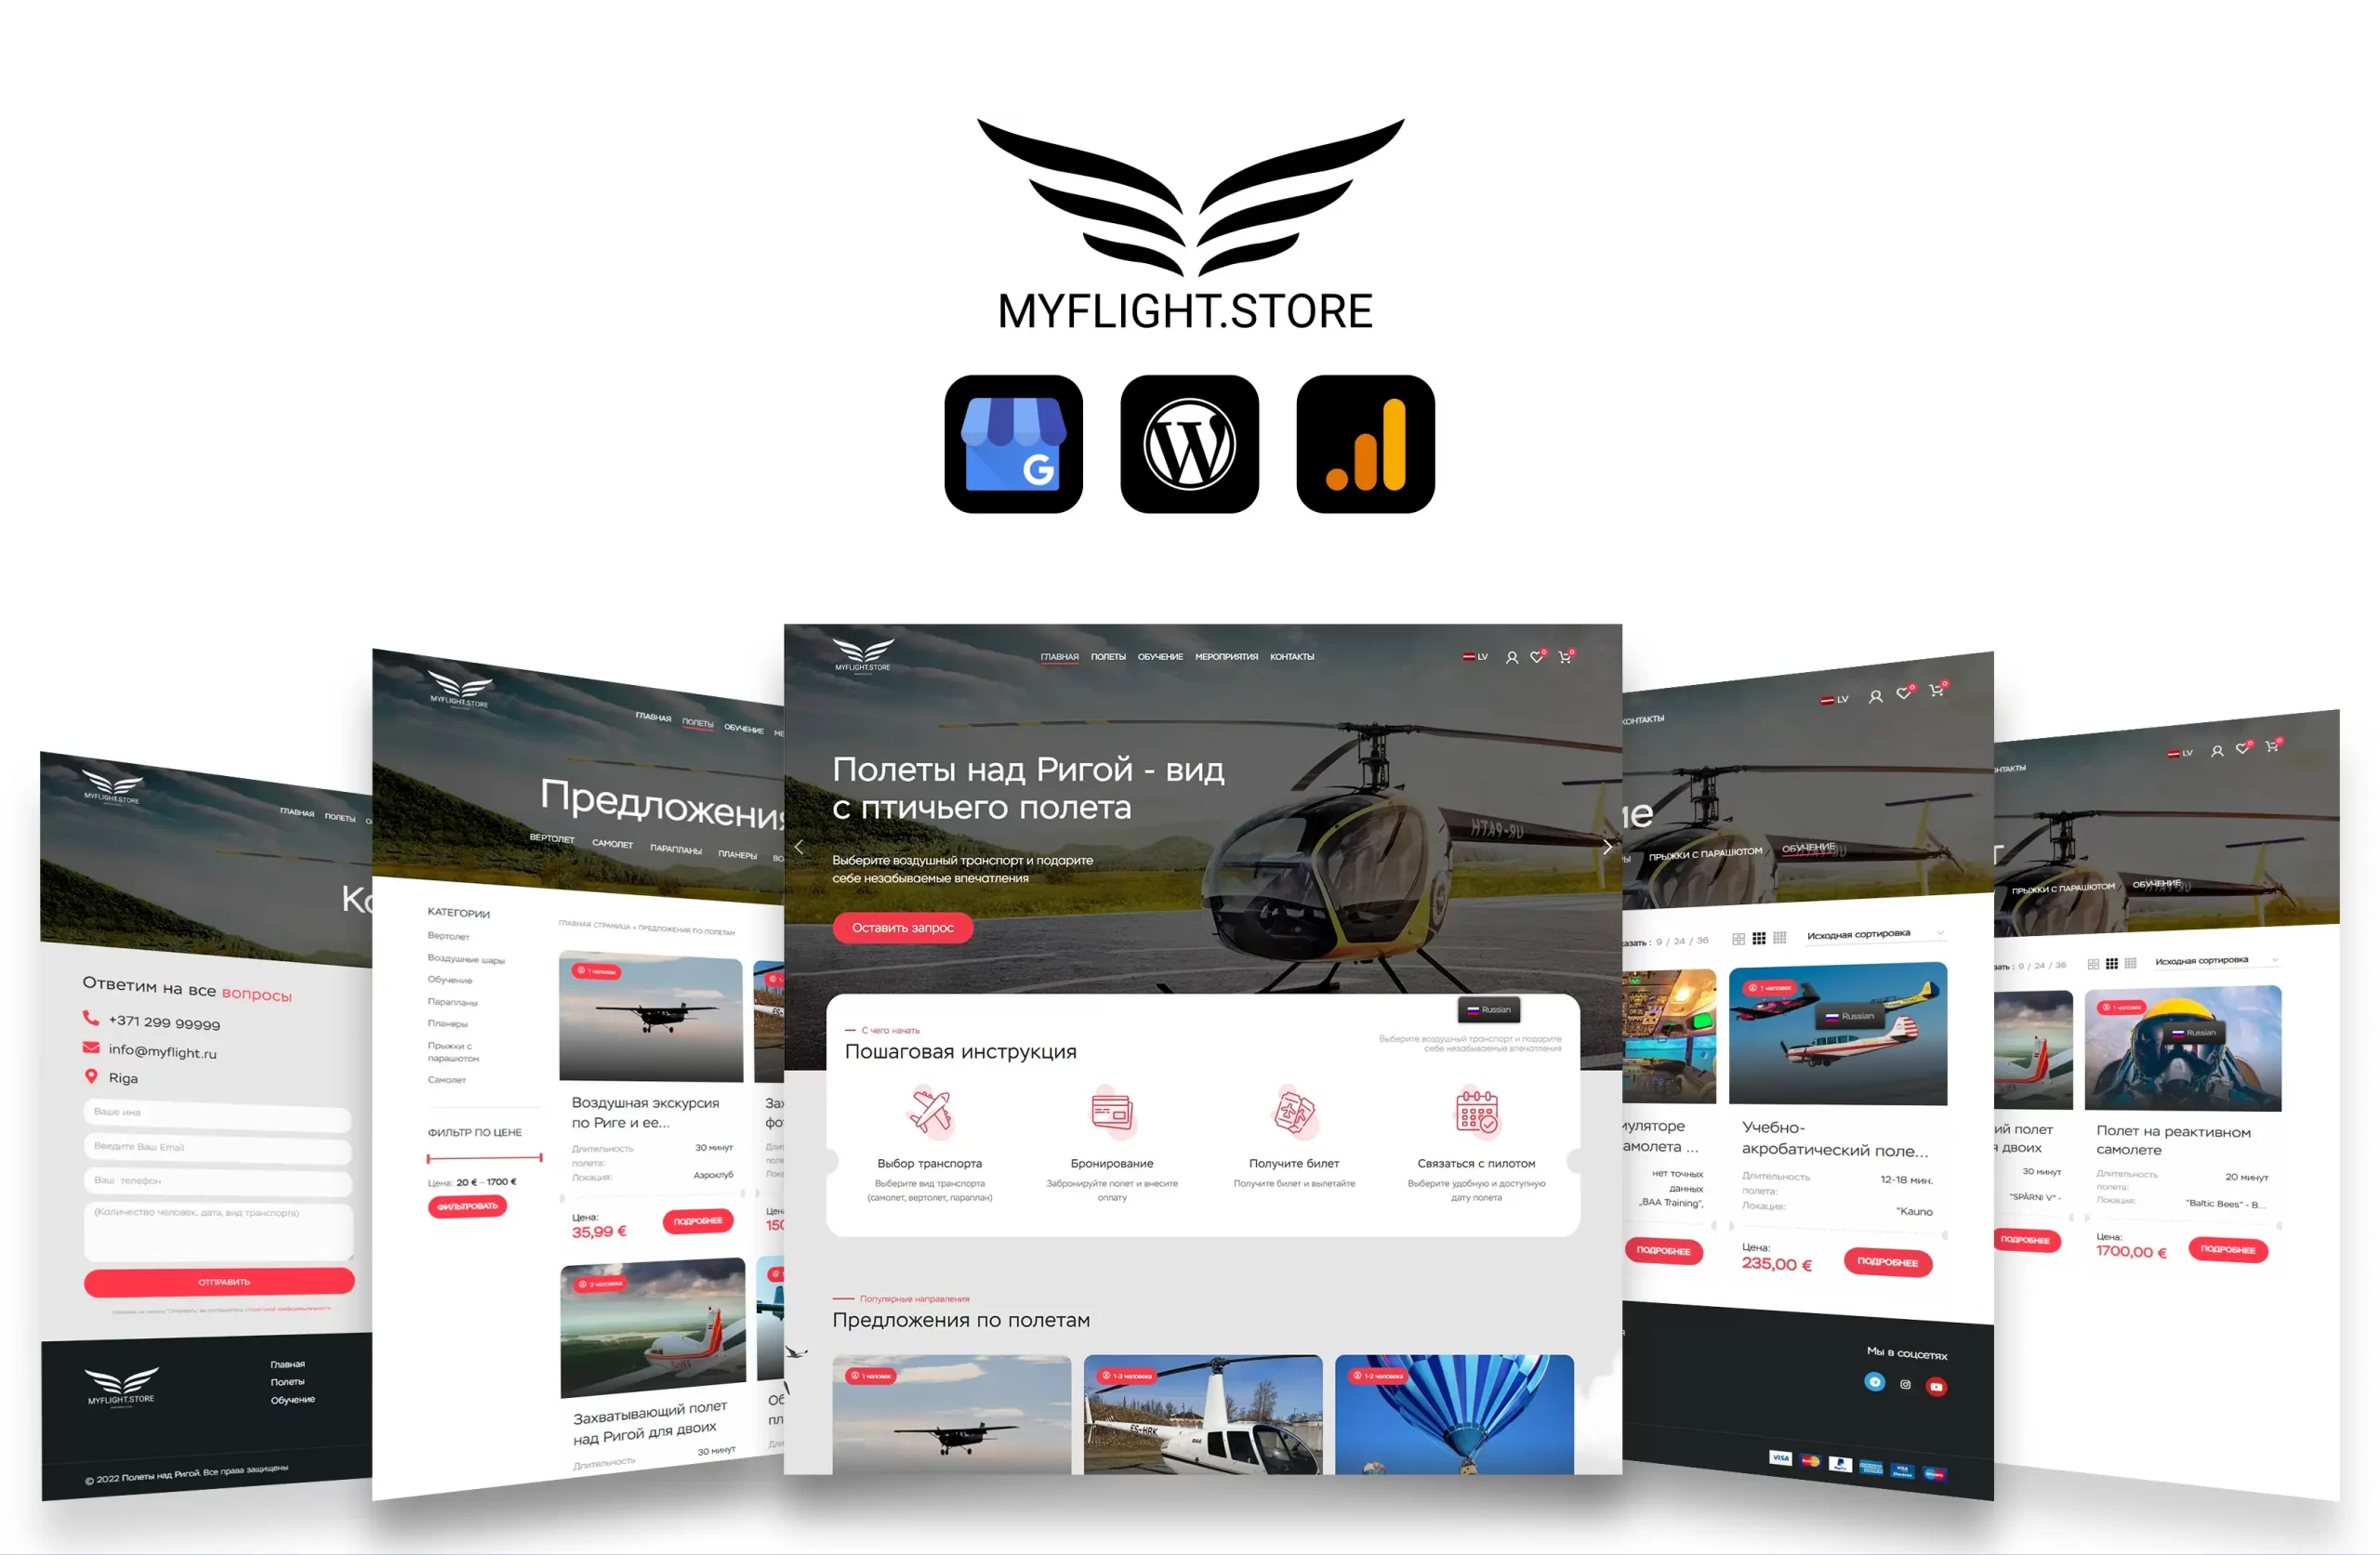 MyFlight.Store - Flights on airplanes, helicopters, etc.